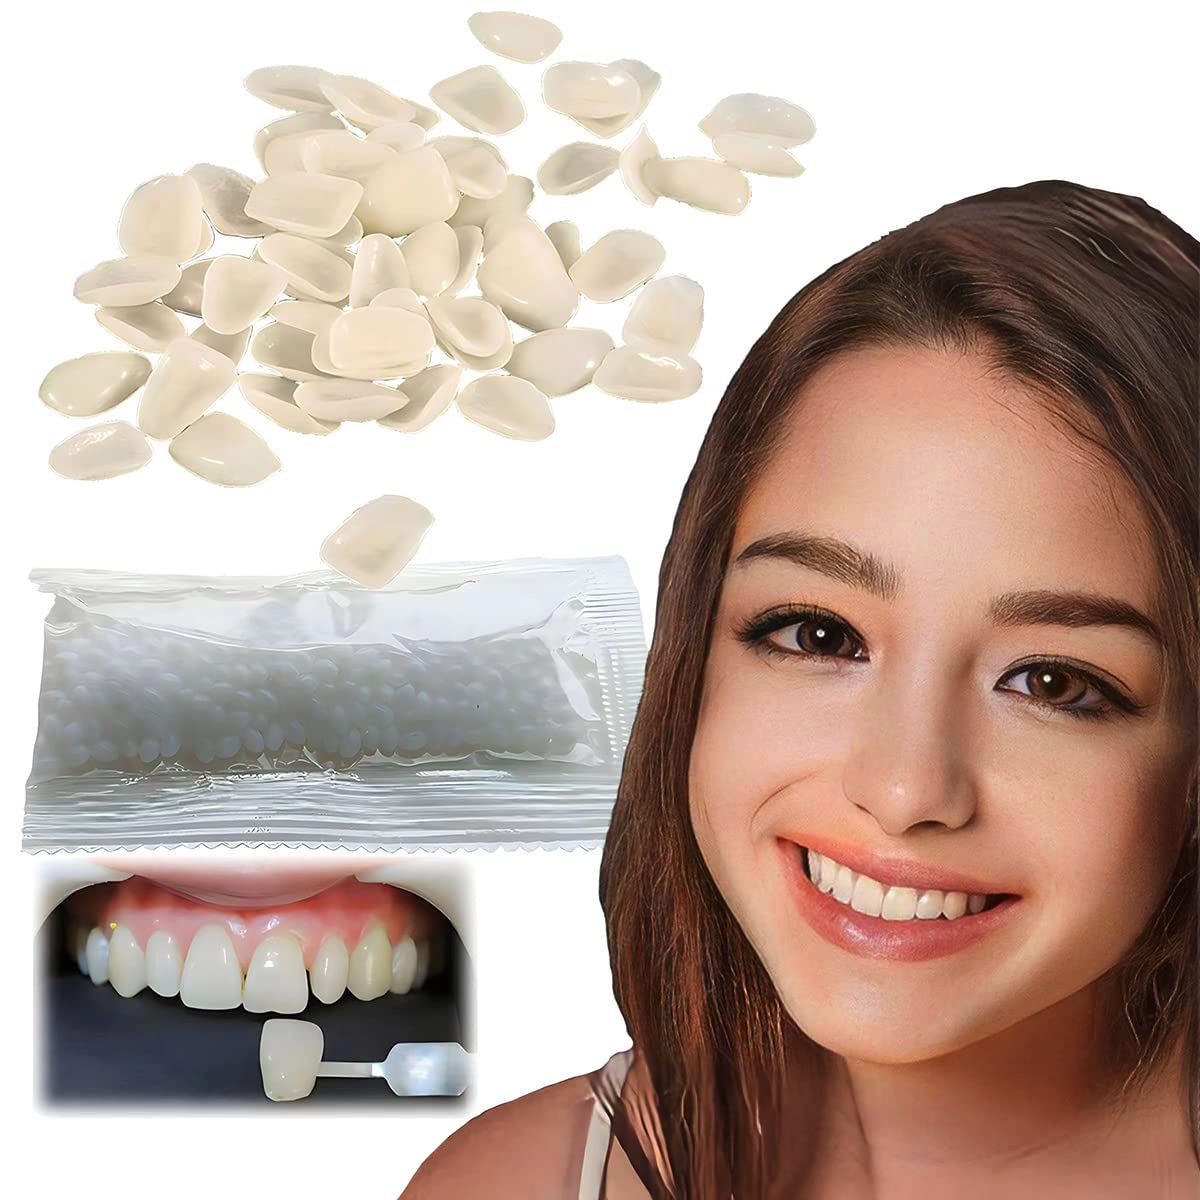 Tooth Repair Kit,DIY Thermal Fitting Beads,Moldable Temporary False  Teeth,Restore Confidence Smile